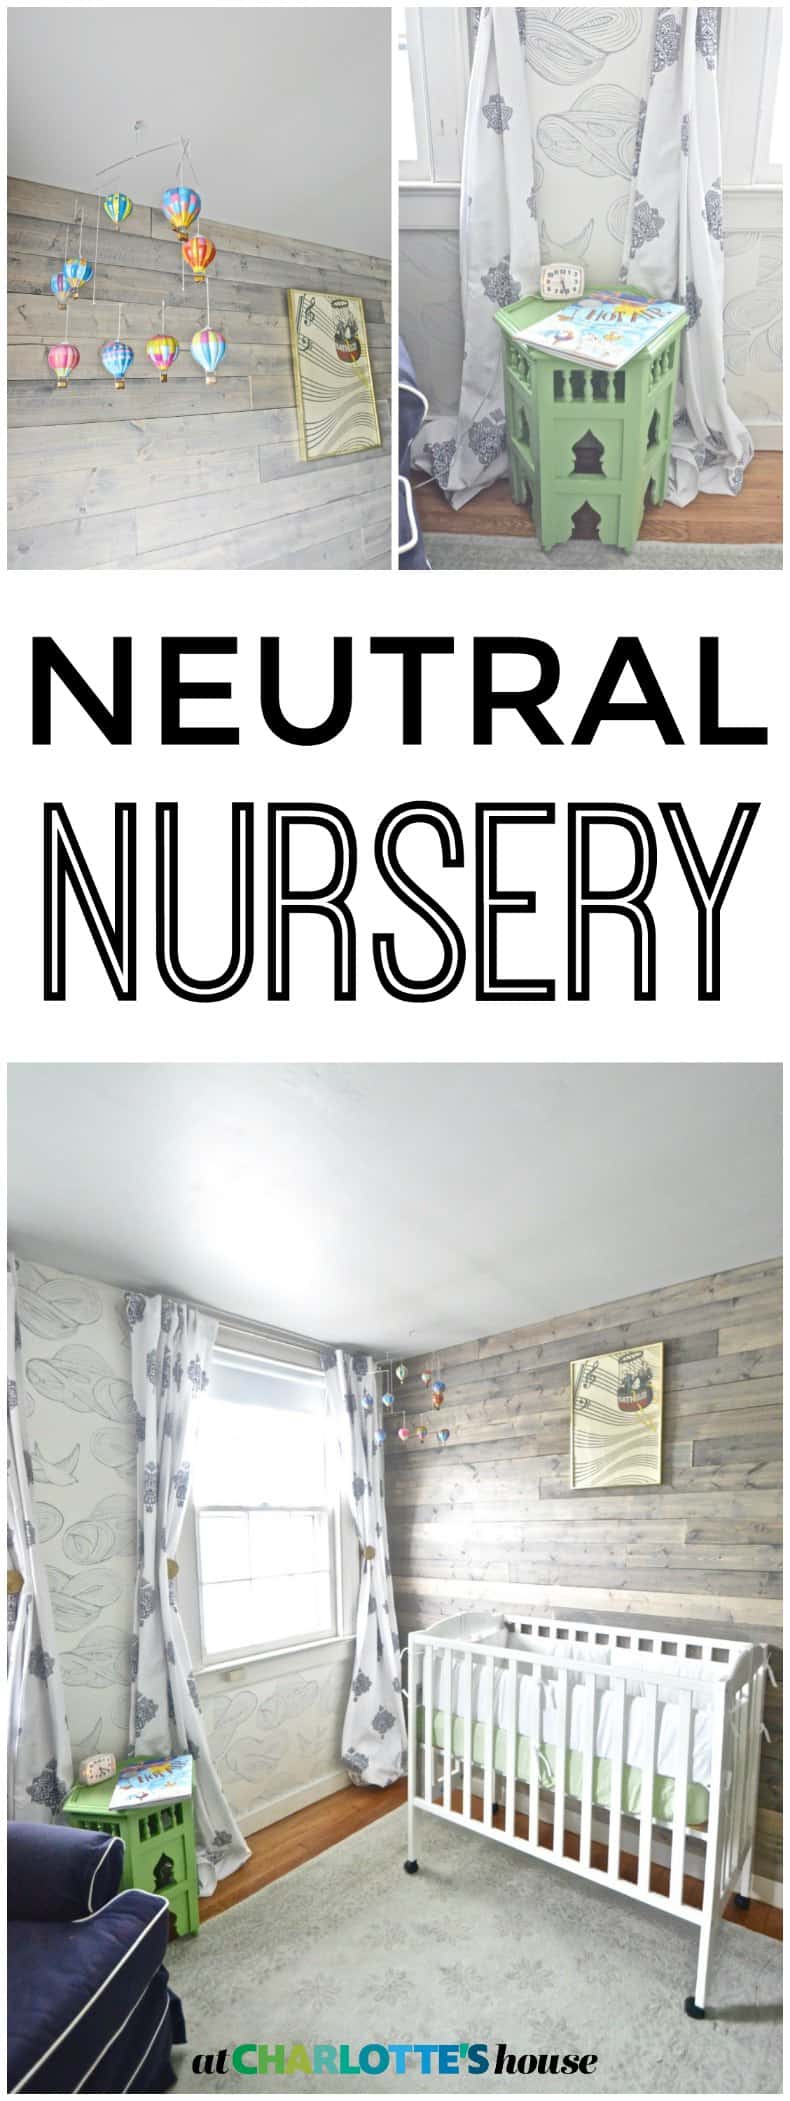 Designing a neutral nursery with pattern and texture.